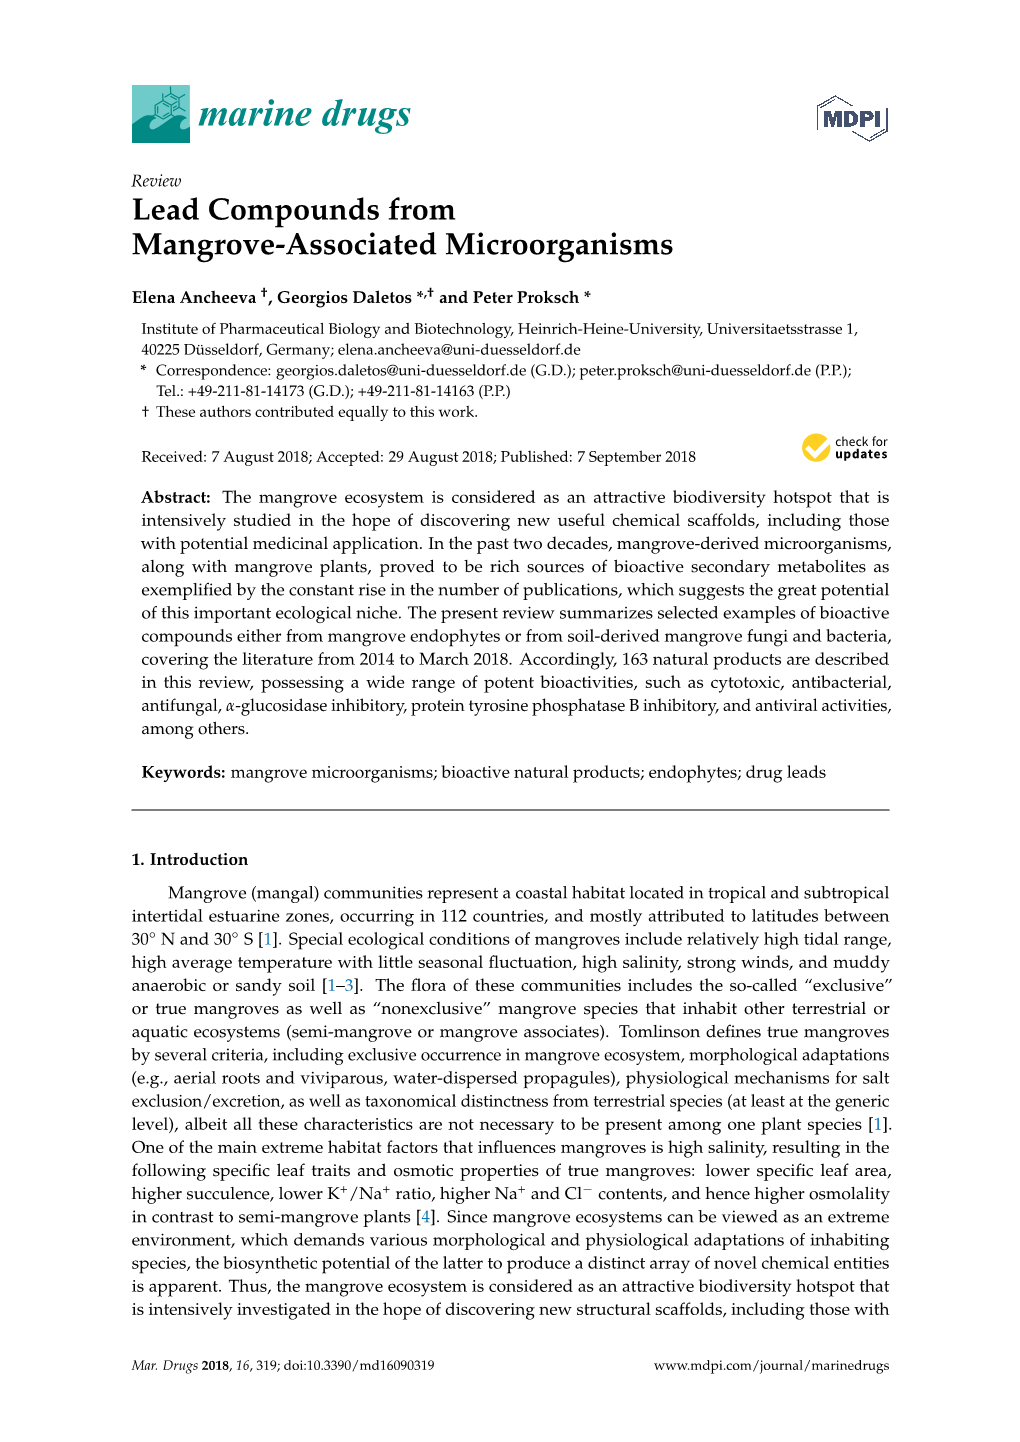 Lead Compounds from Mangrove-Associated Microorganisms